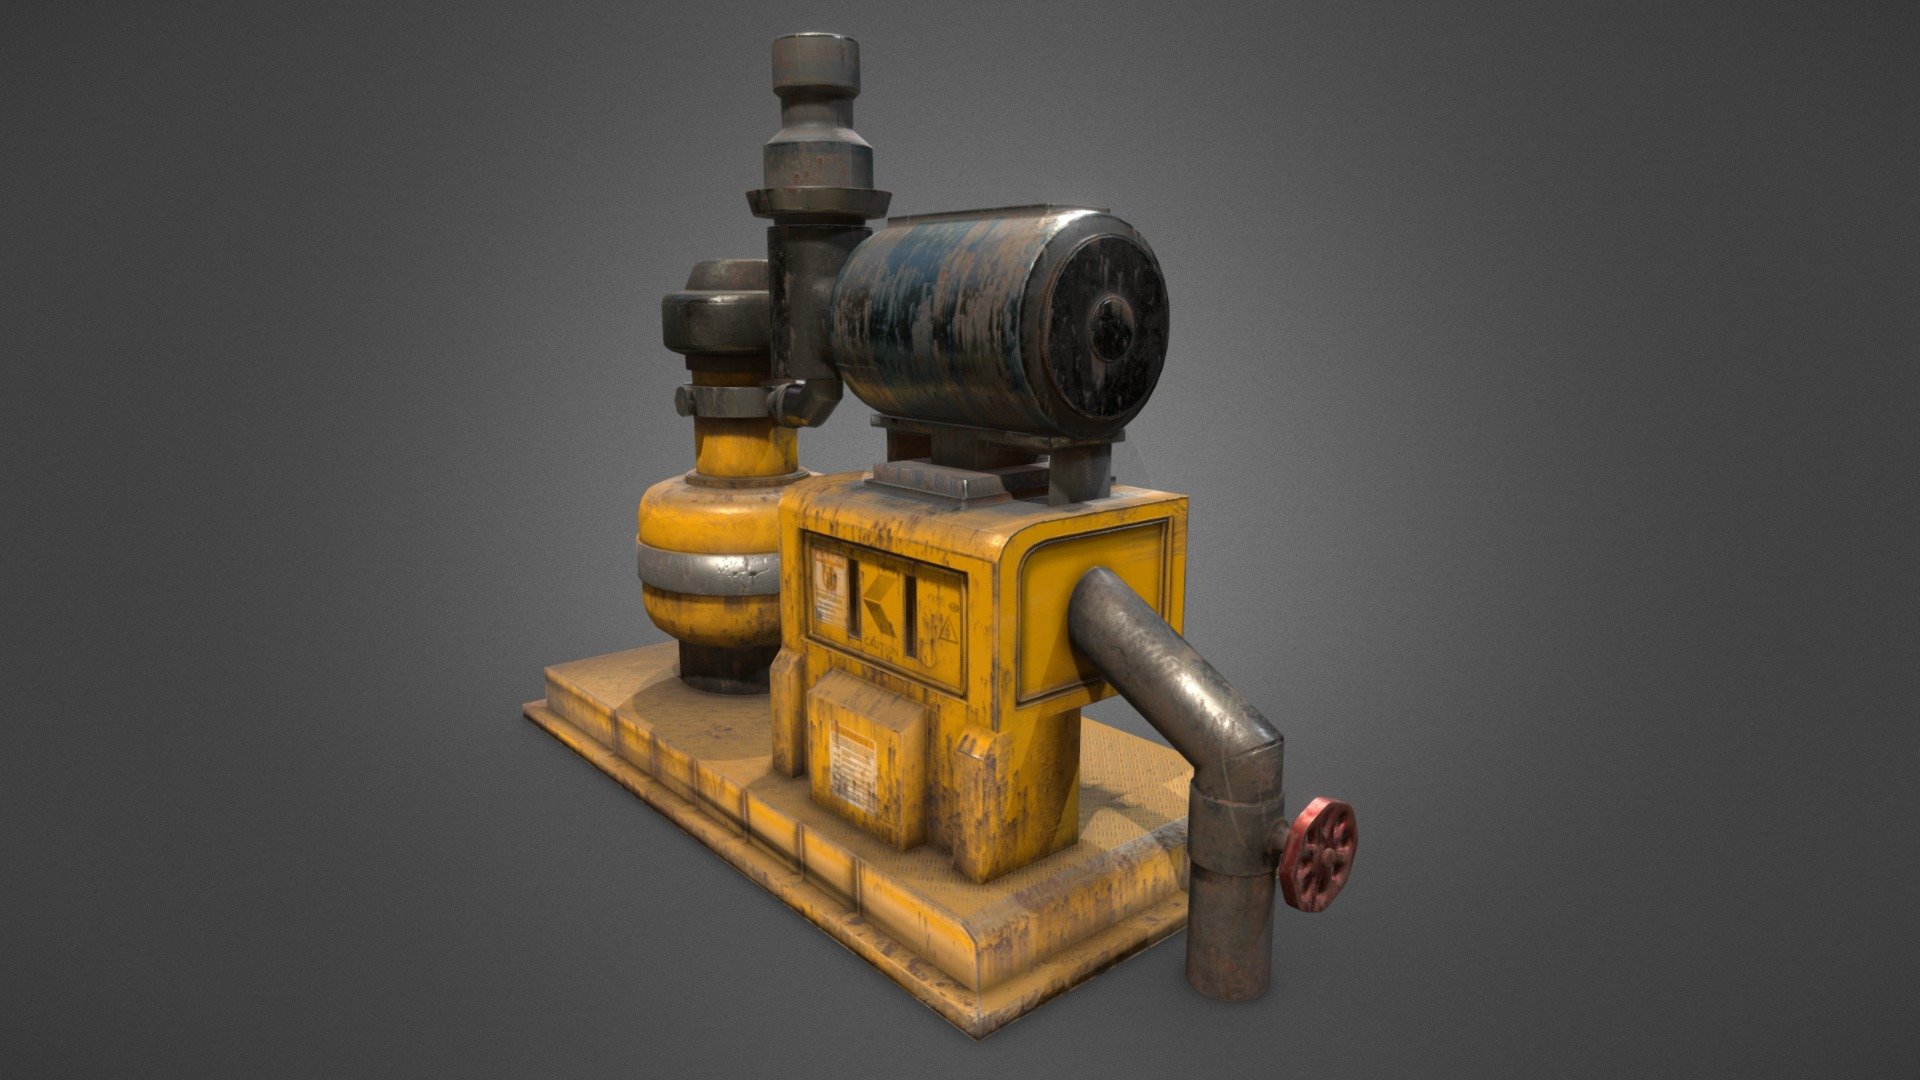 This is a 3d model of a pump machine excelent for underground environments or company basements, blends in perfectly as a decorative asset or barrier for a level design, made entirely in blender and textured in substance painter 3d model